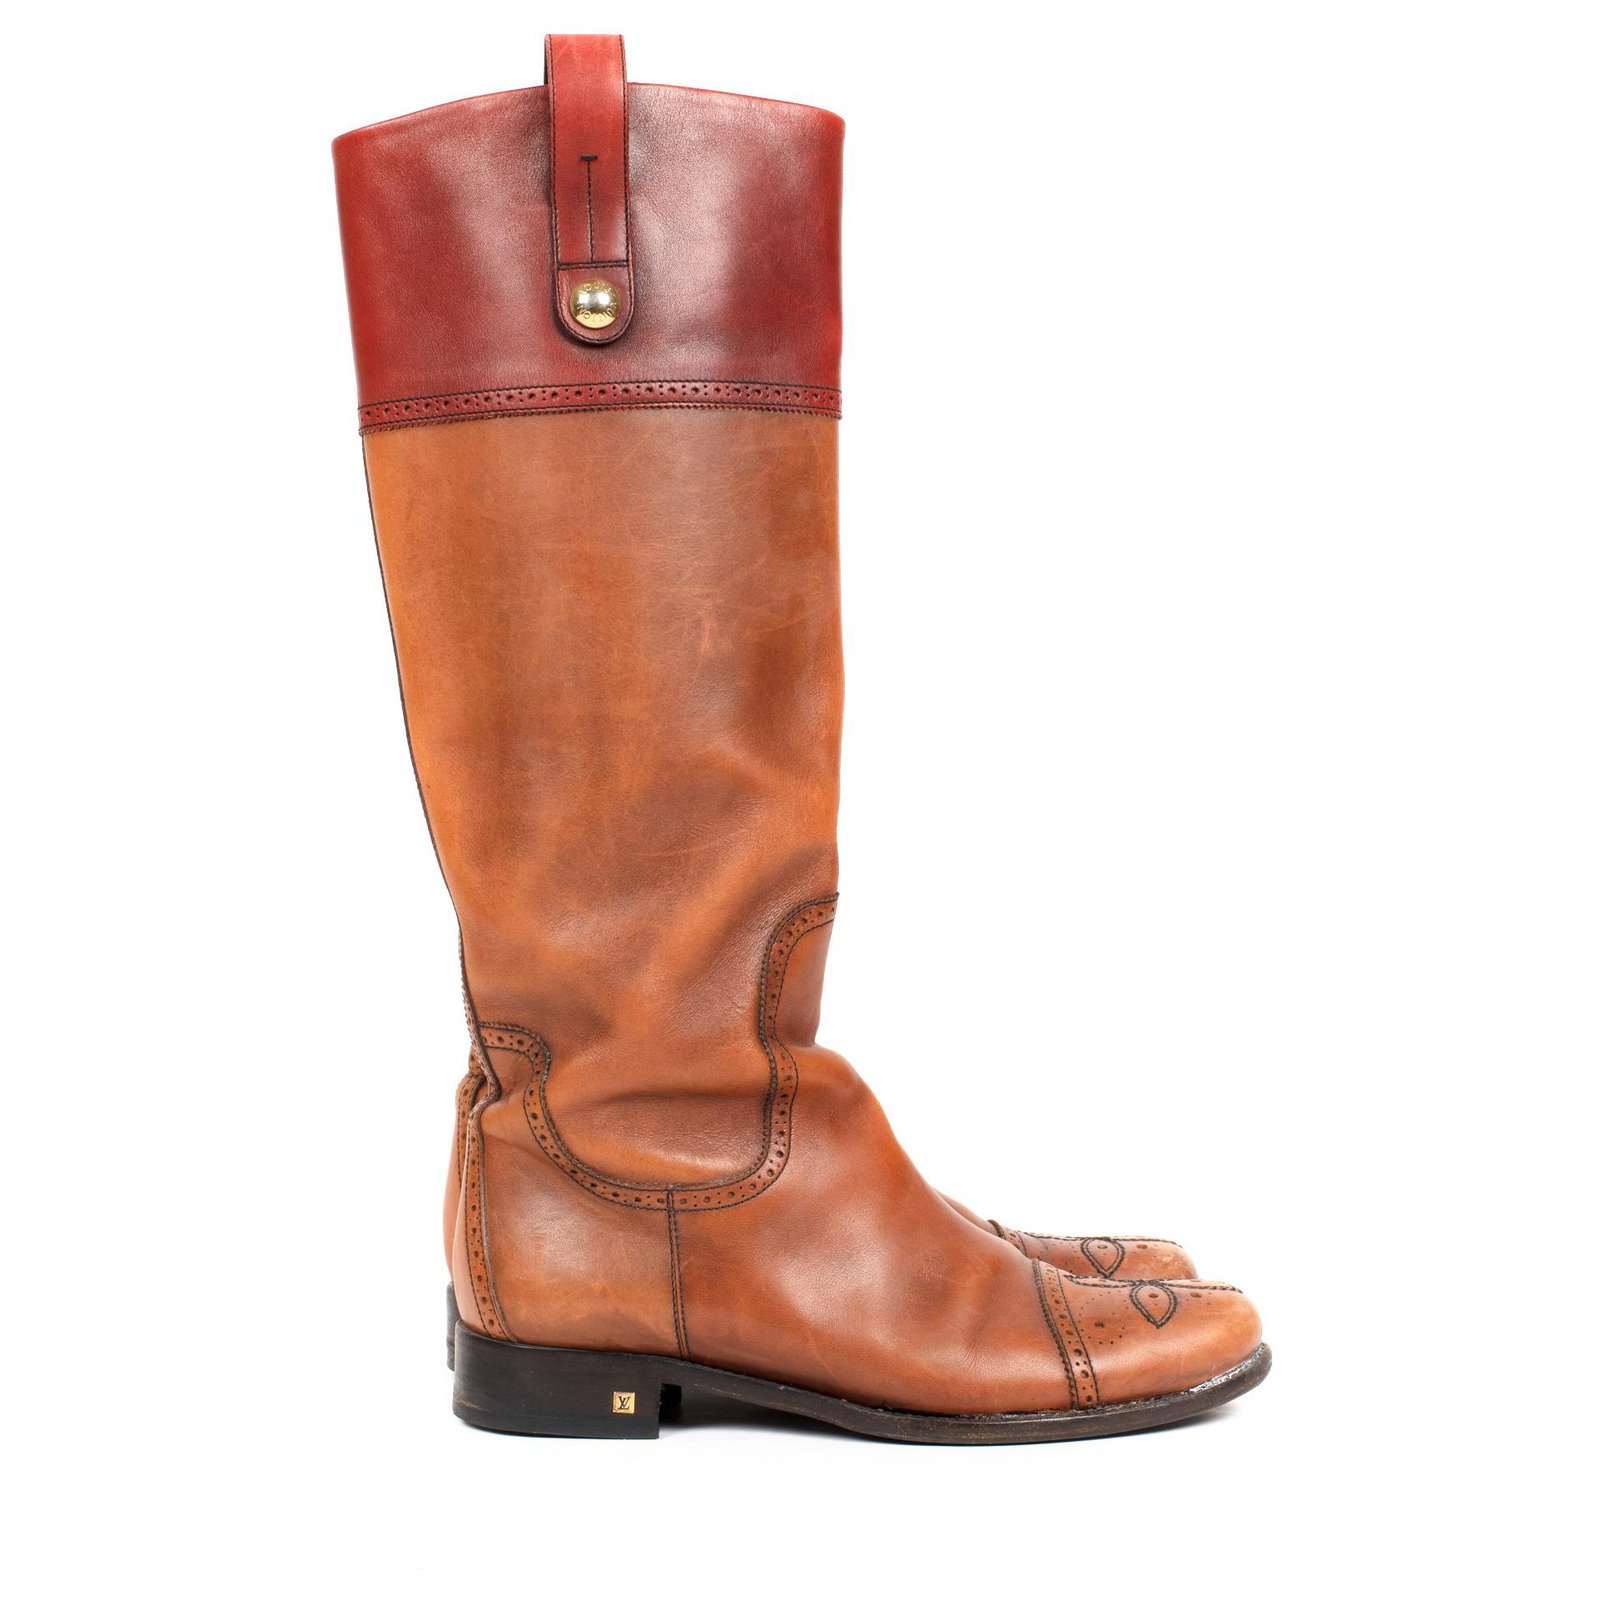 Louis Vuitton riding boots in bicolor camel and burgundy calf